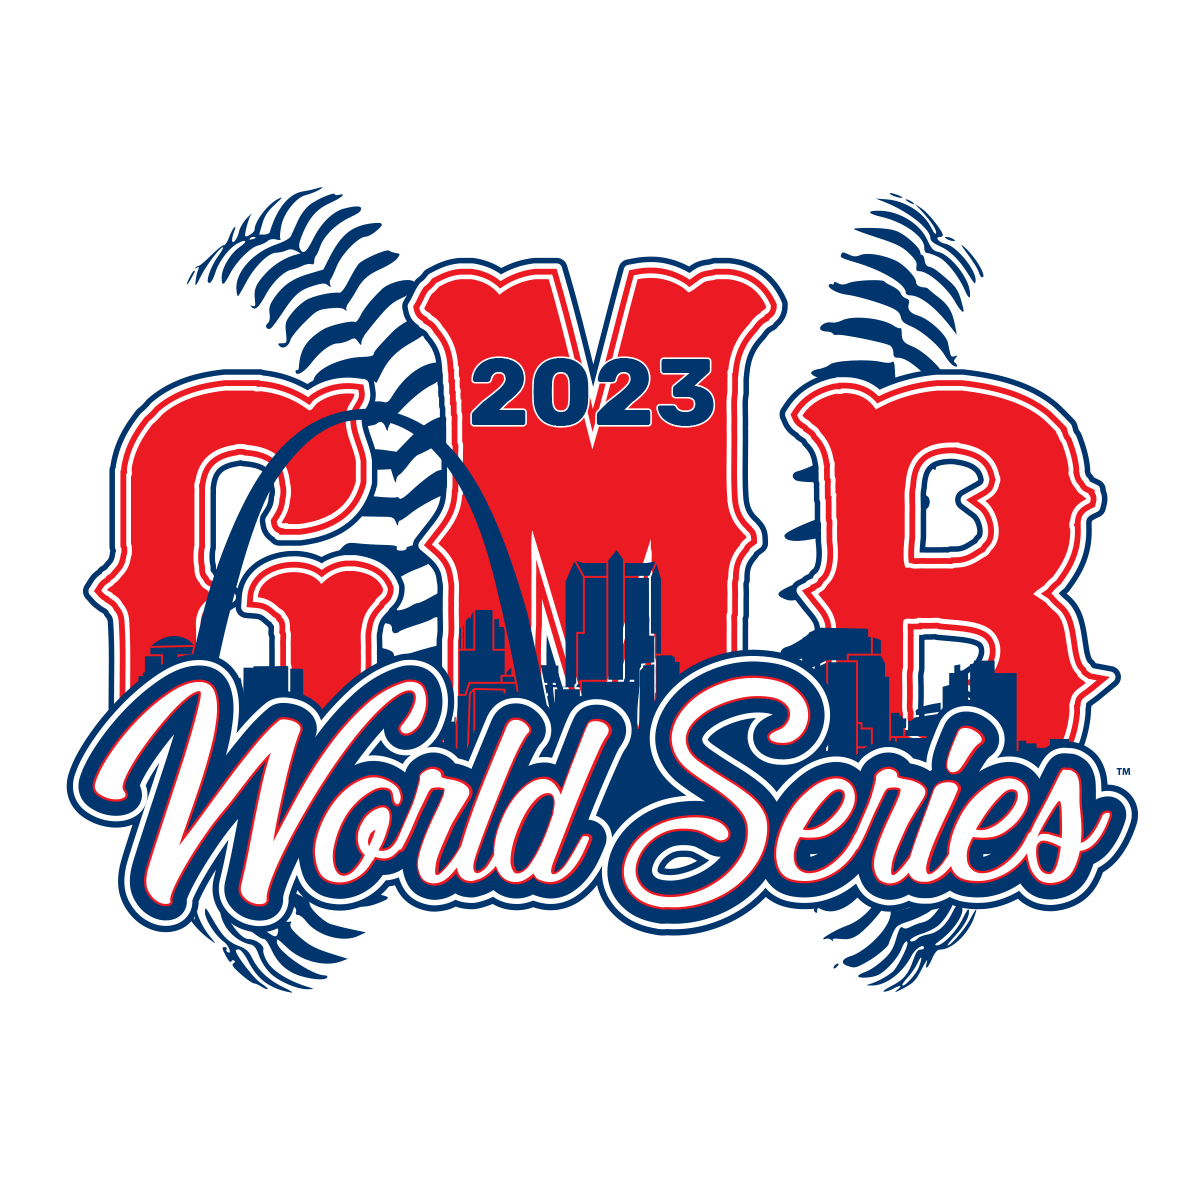 2023-gmb-world-series-06-22-2023-06-25-2023-greater-midwest